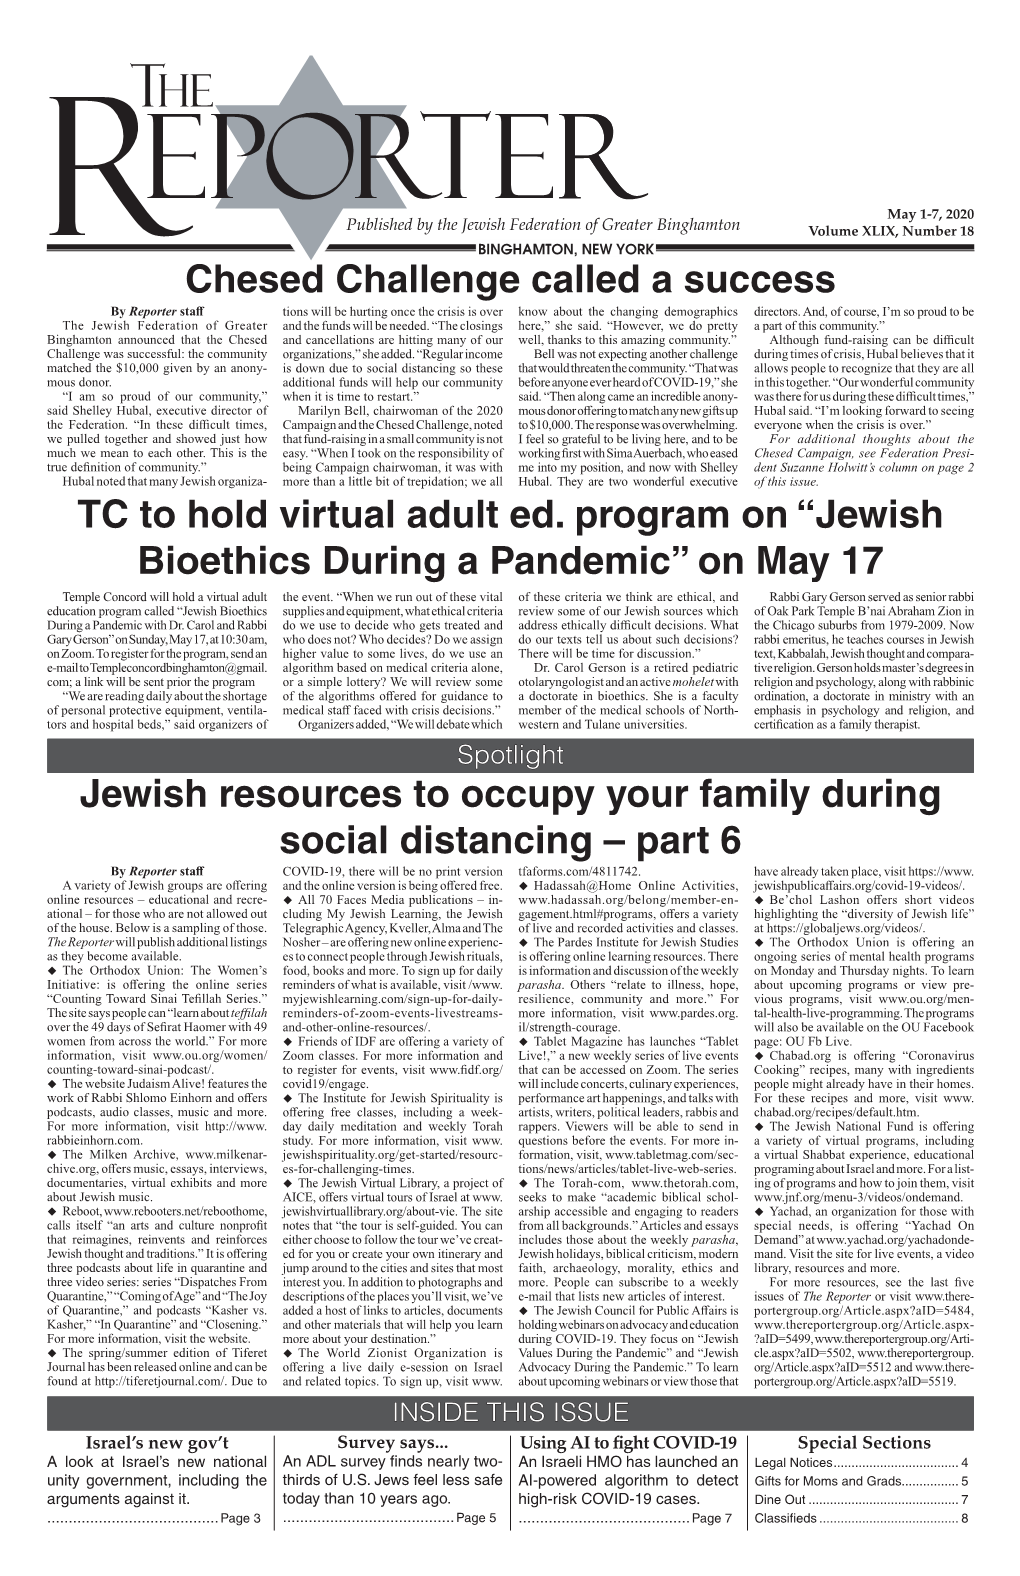 Chesed Challenge Called a Success TC to Hold Virtual Adult Ed. Program on “Jewish Bioethics During a Pandemic” on May 17